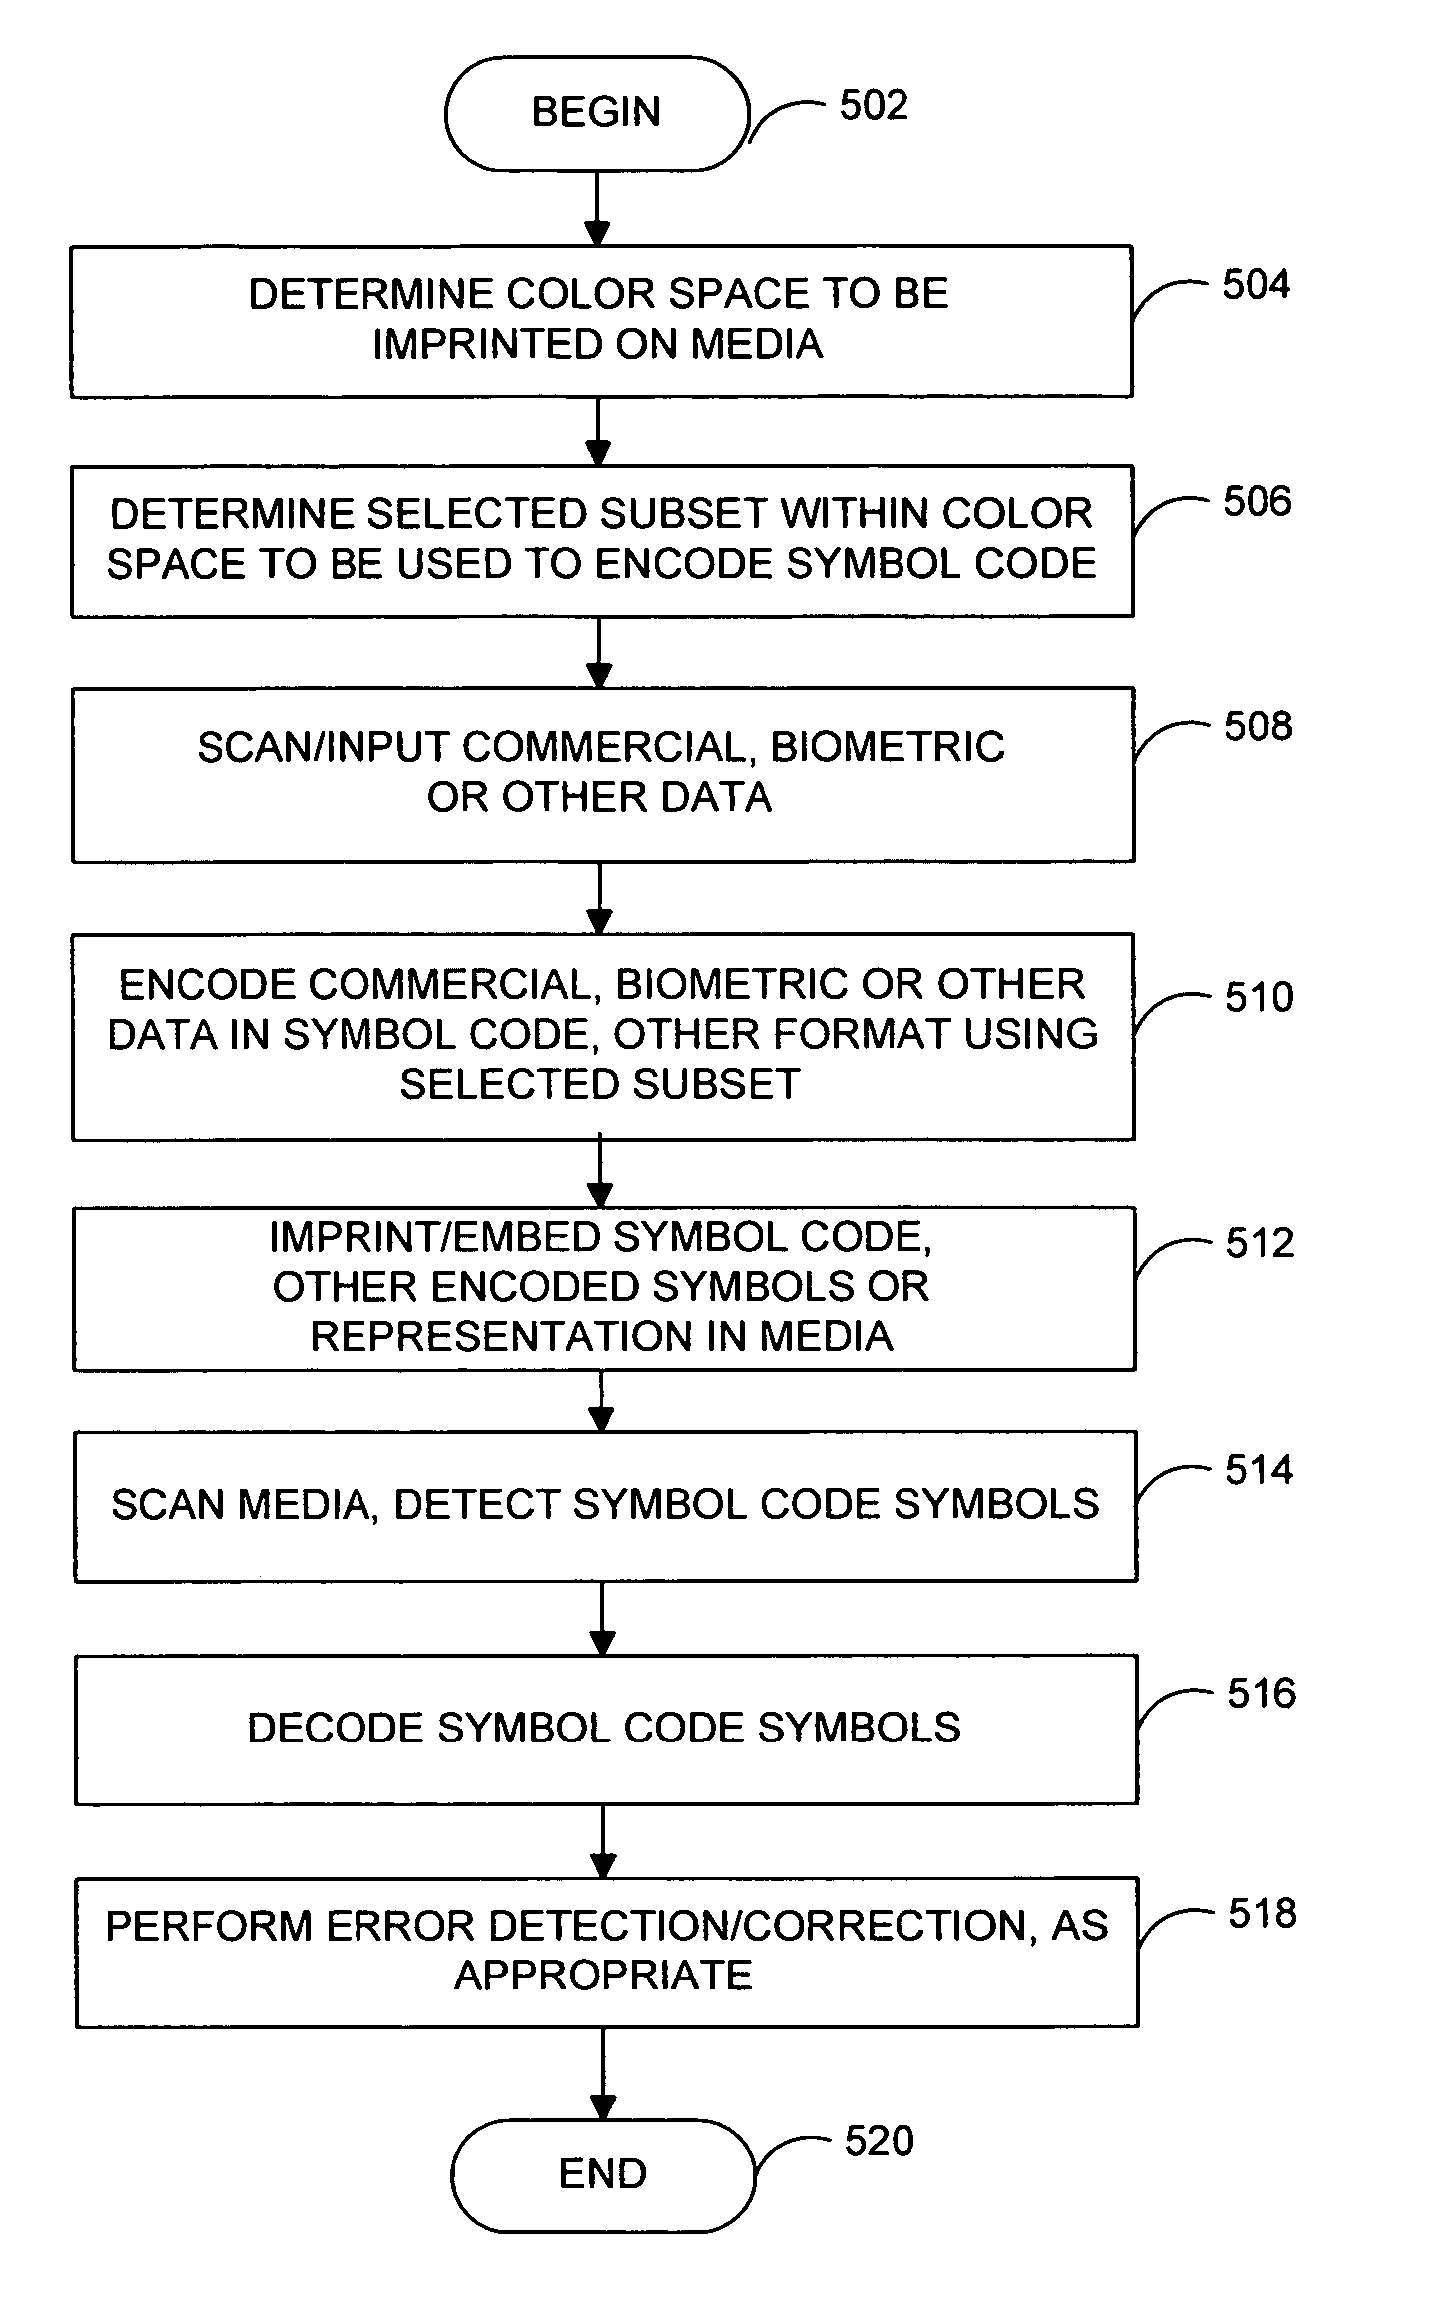 System and method for selectively encoding a symbol code in a color space